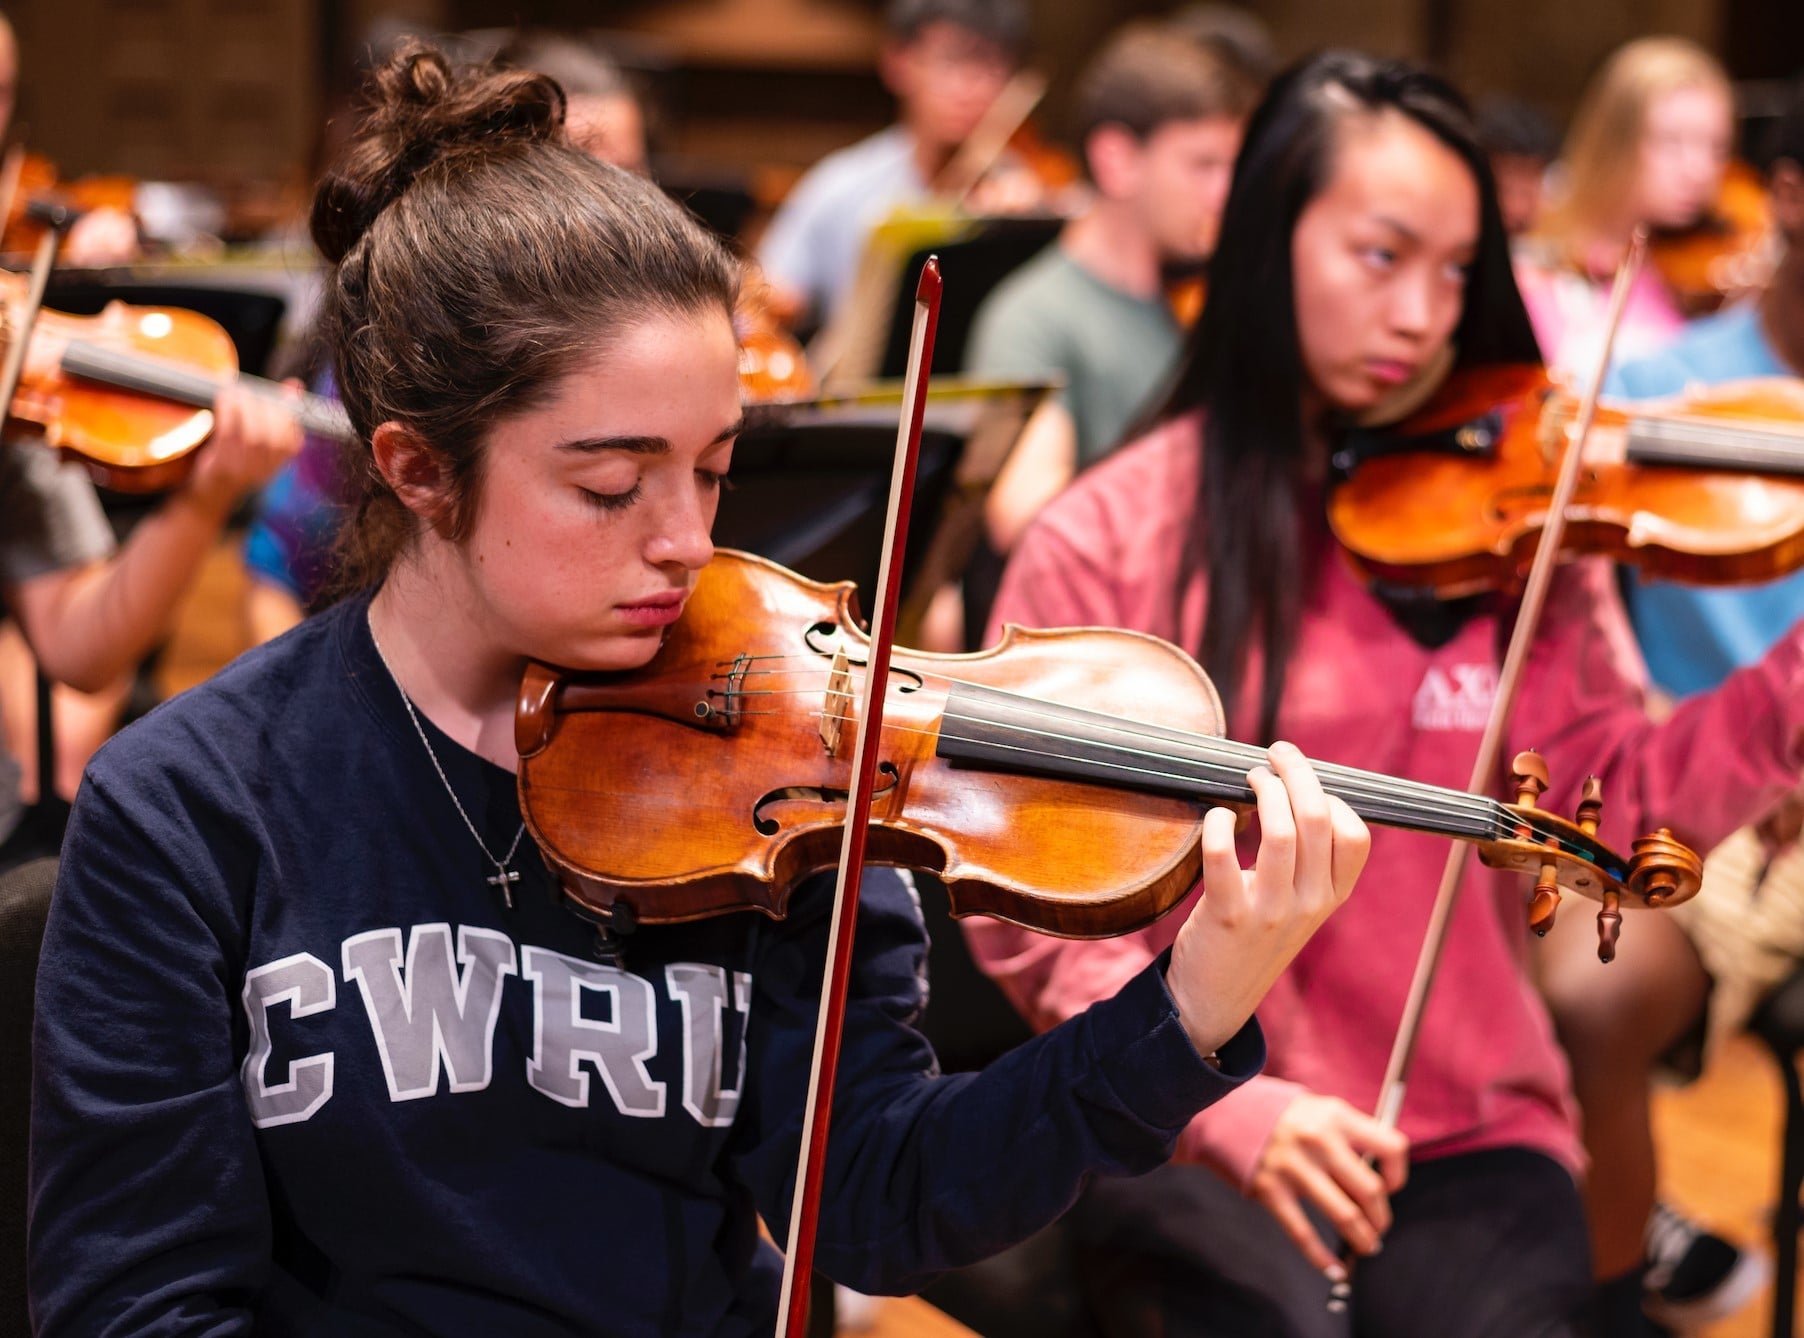 String students rehearsing with CWRU sweaters